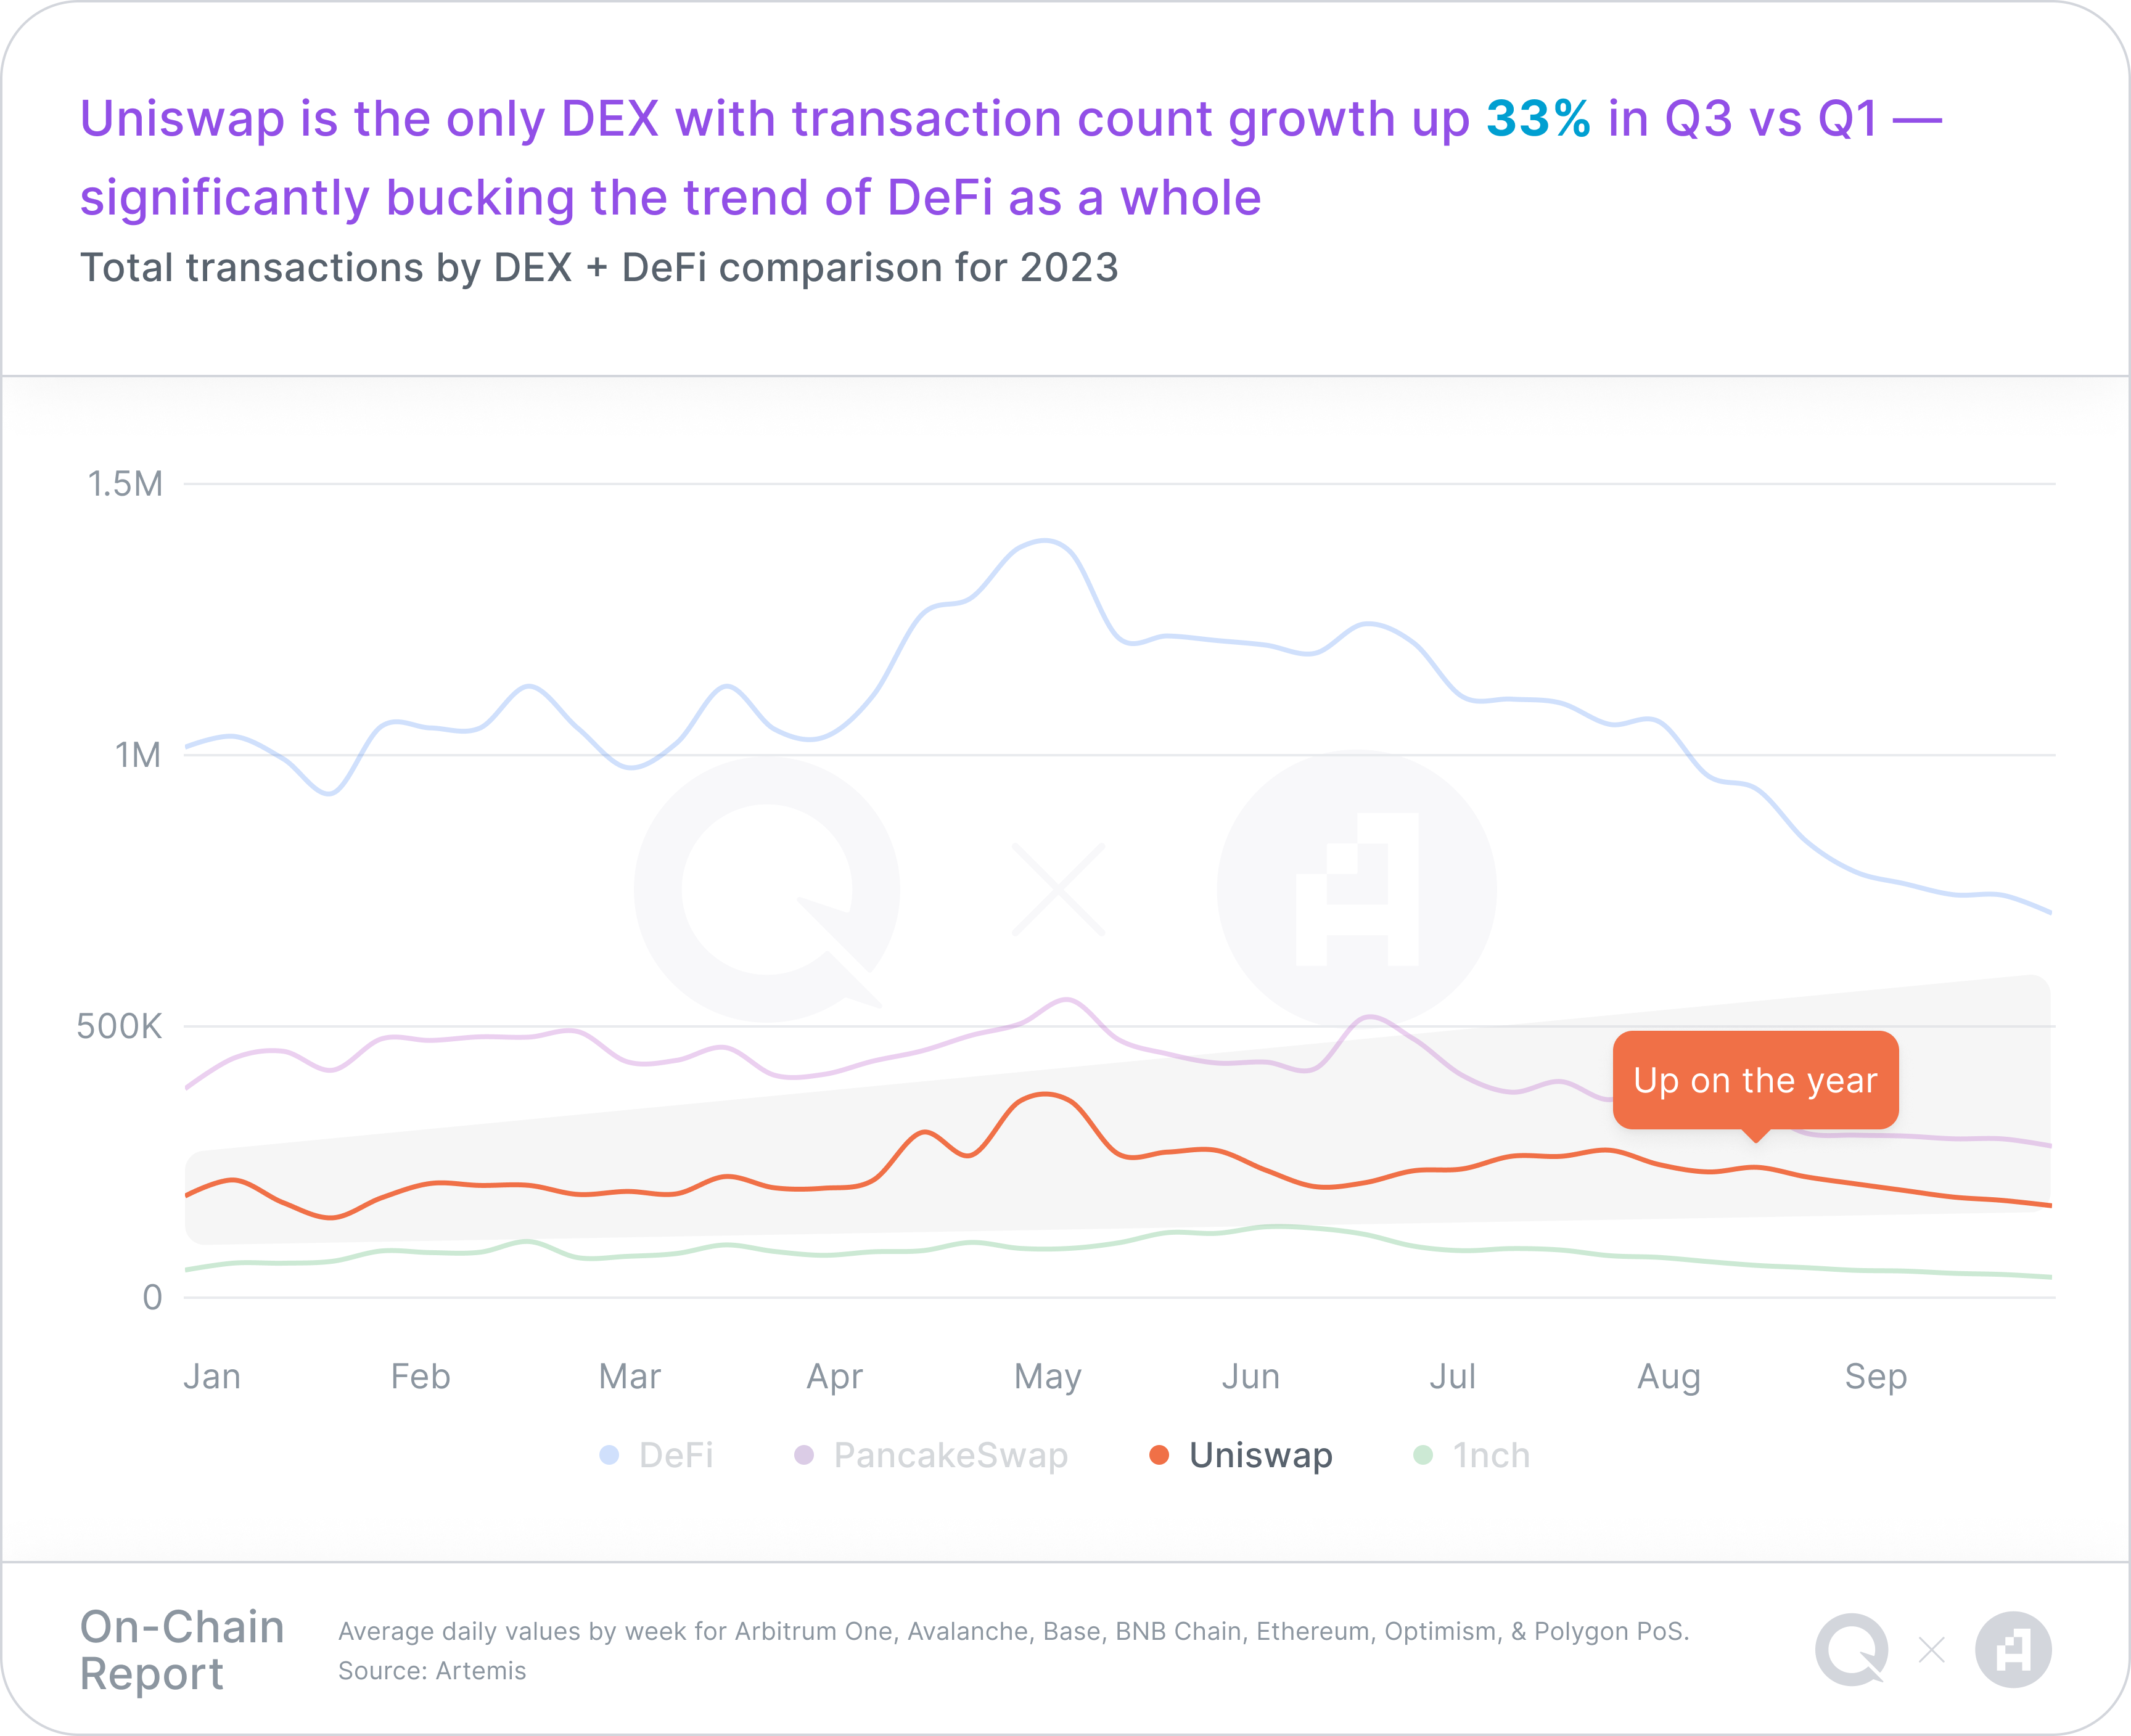 A chart representing total transactions by DEX + DeFi comparison for 2023, with a takeaway headline of "Uniswap is the only DEX with transaction count growth up 33% in Q3 vs Q1 — significantly bucking the trend of DeFi as a whole"